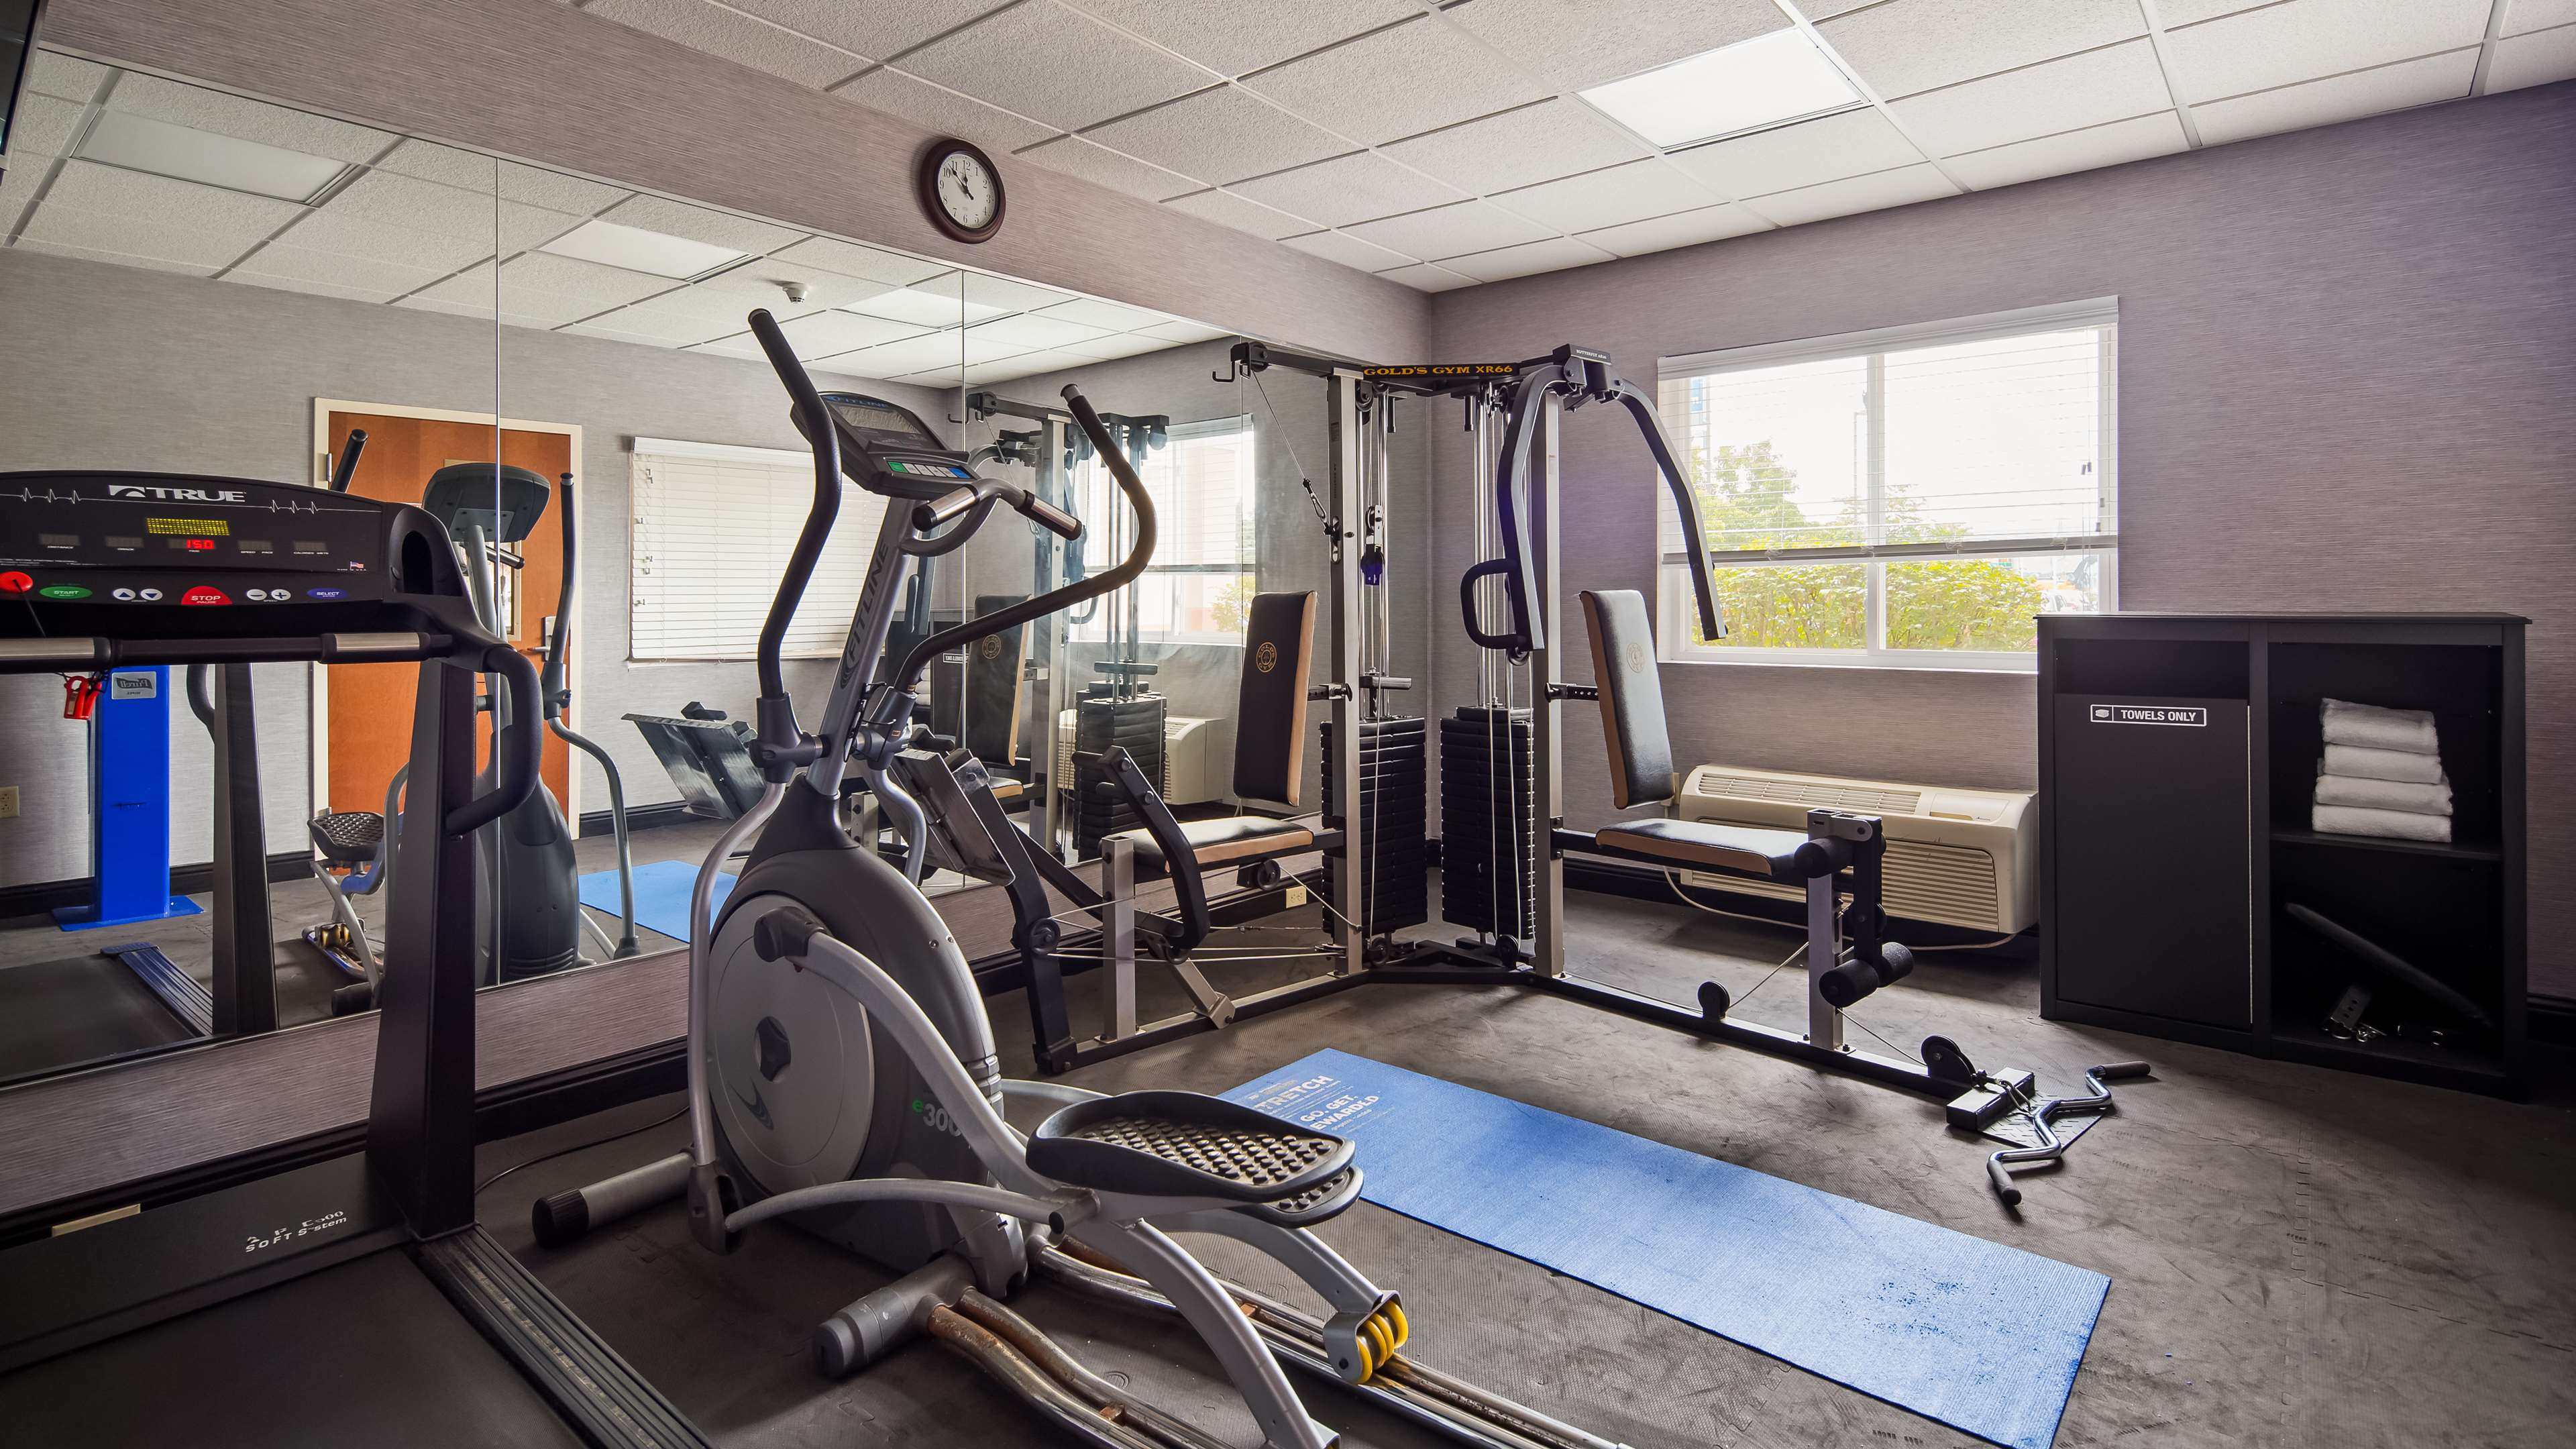 Stay active by starting your day in our fitness center